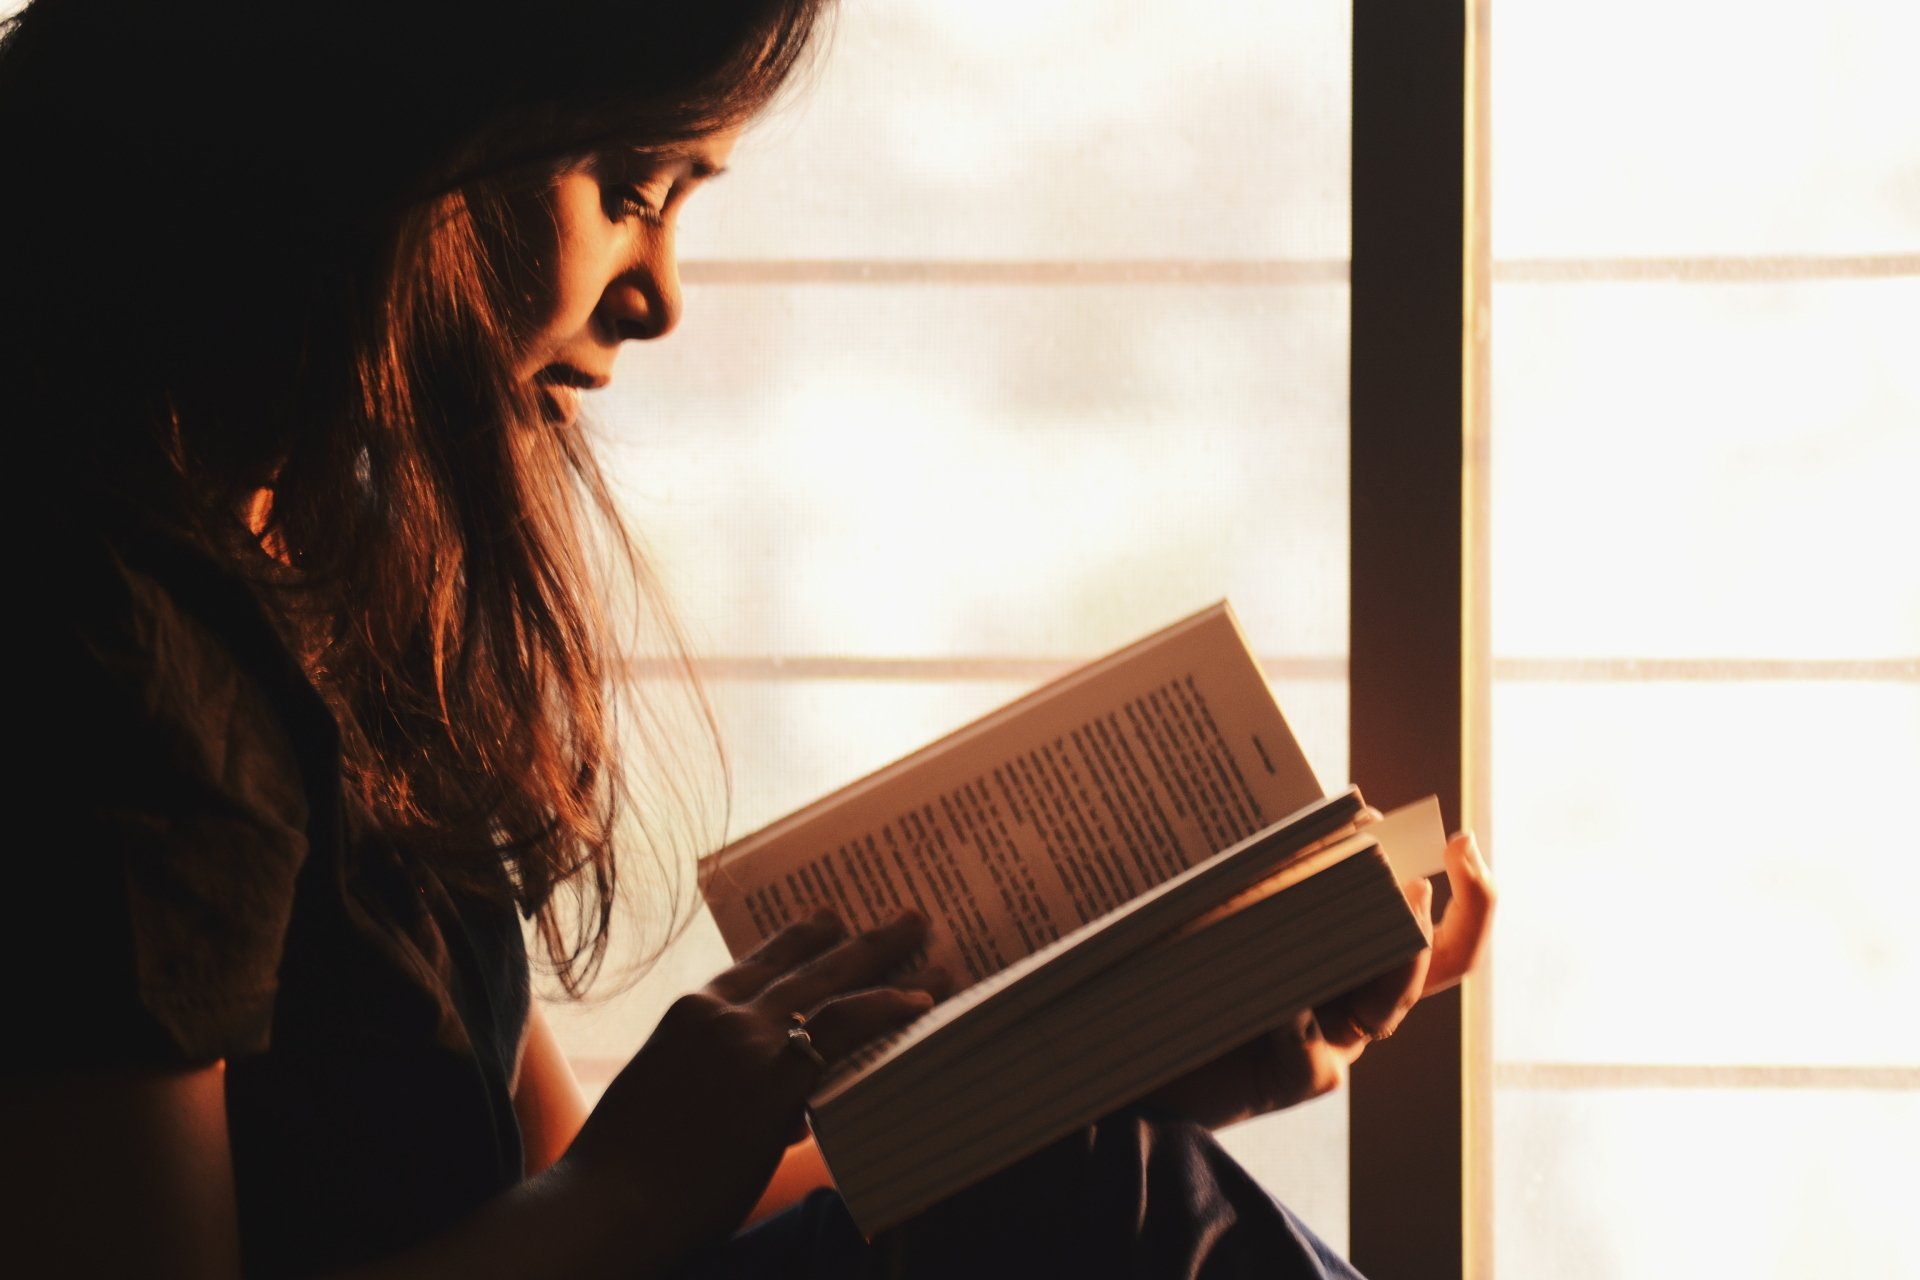 woman reading book with sun coming through window